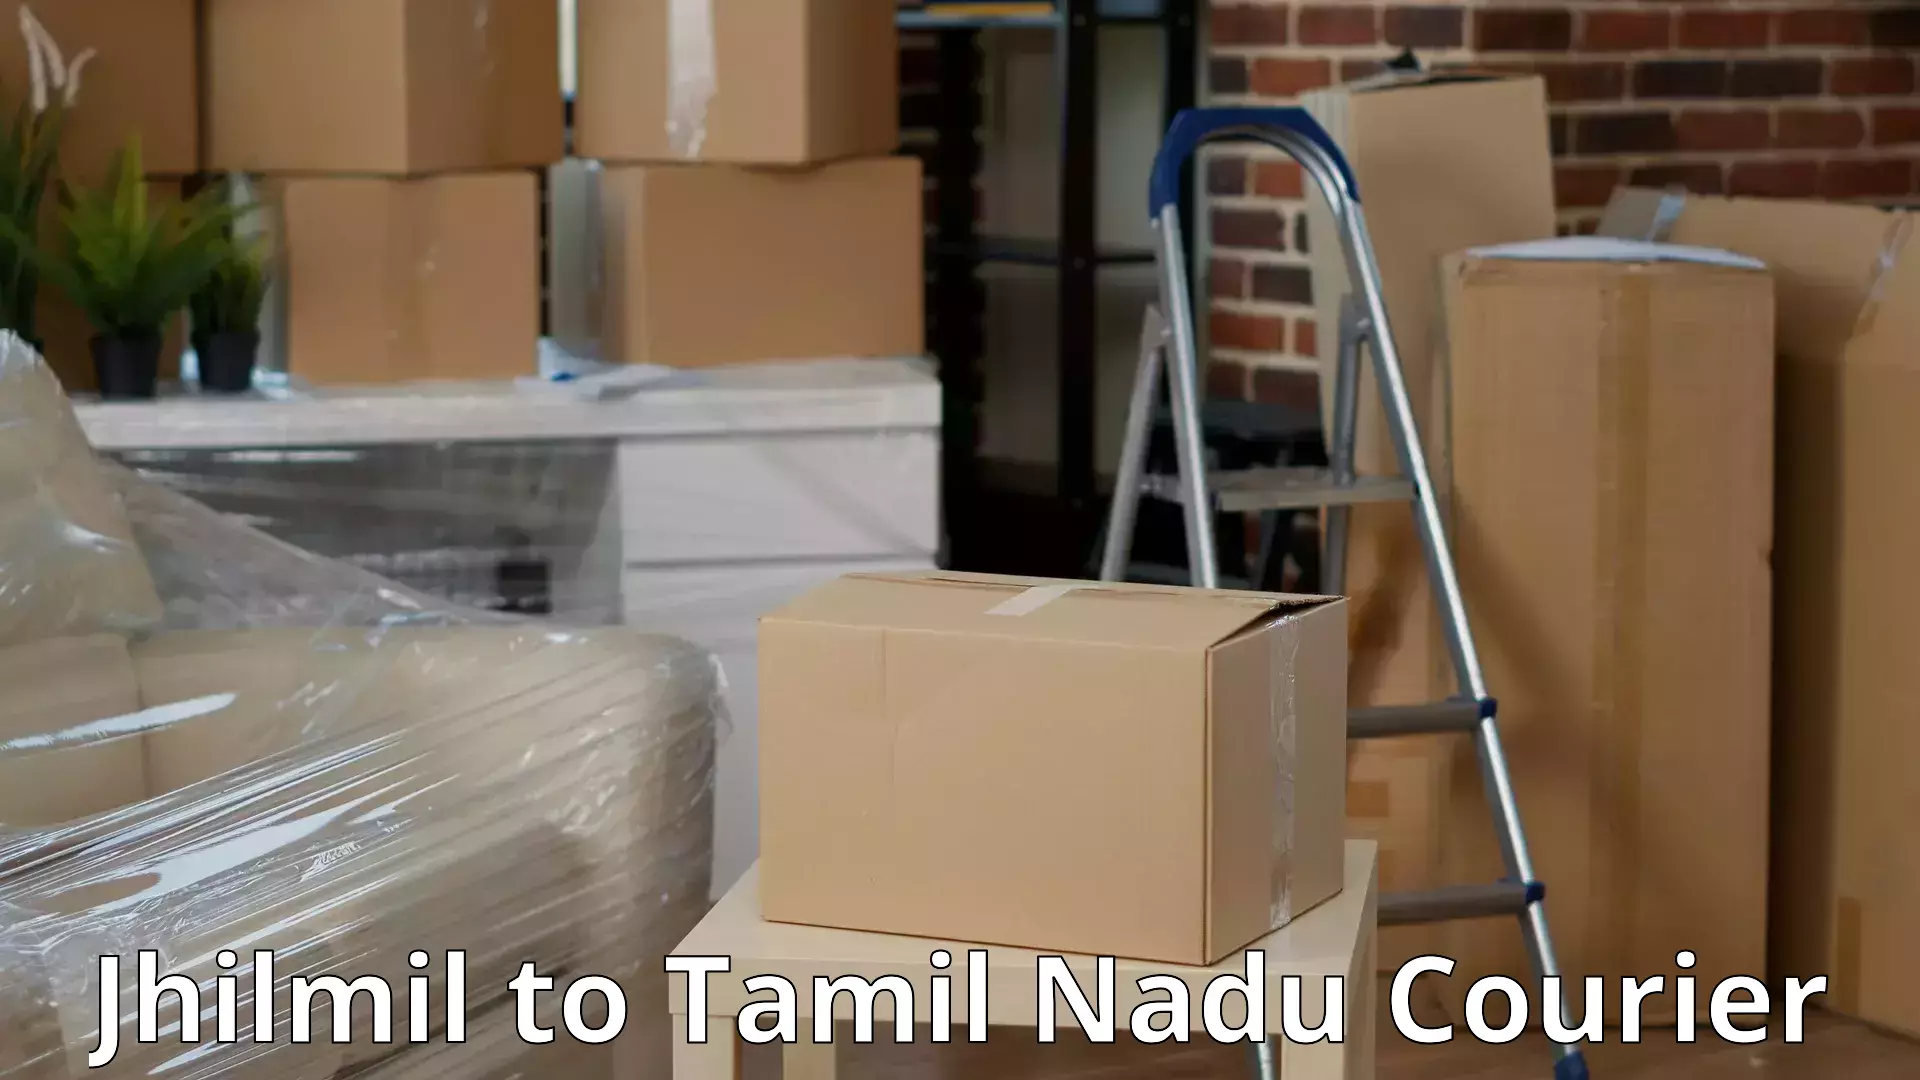 Budget-friendly moving services Jhilmil to Tamil Nadu